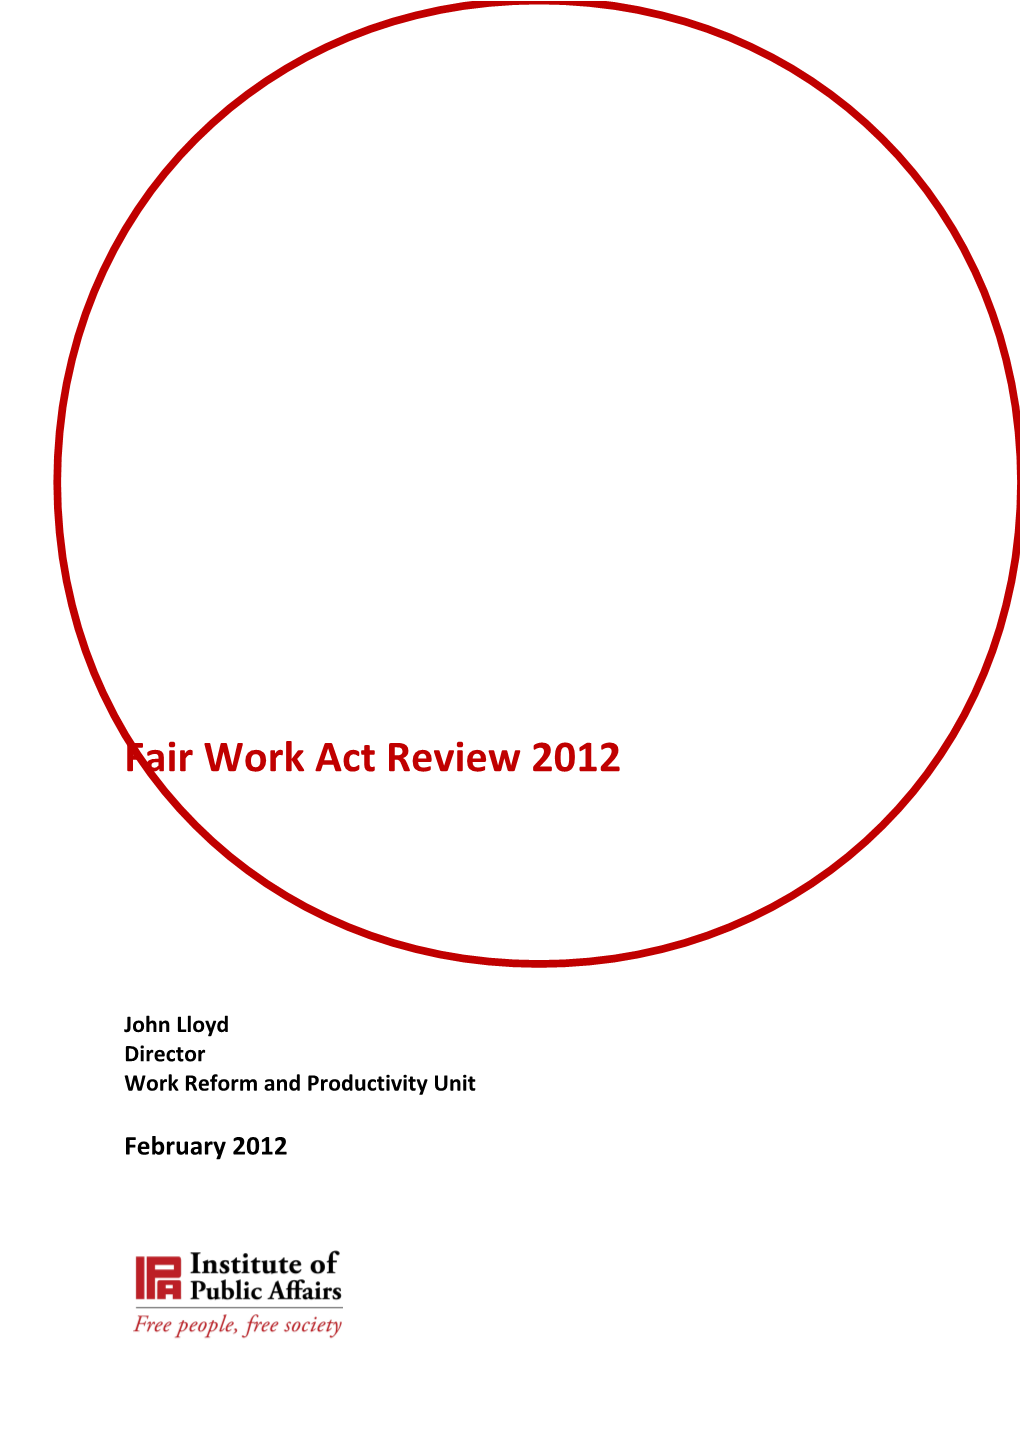 Fair Work Act Review 2012